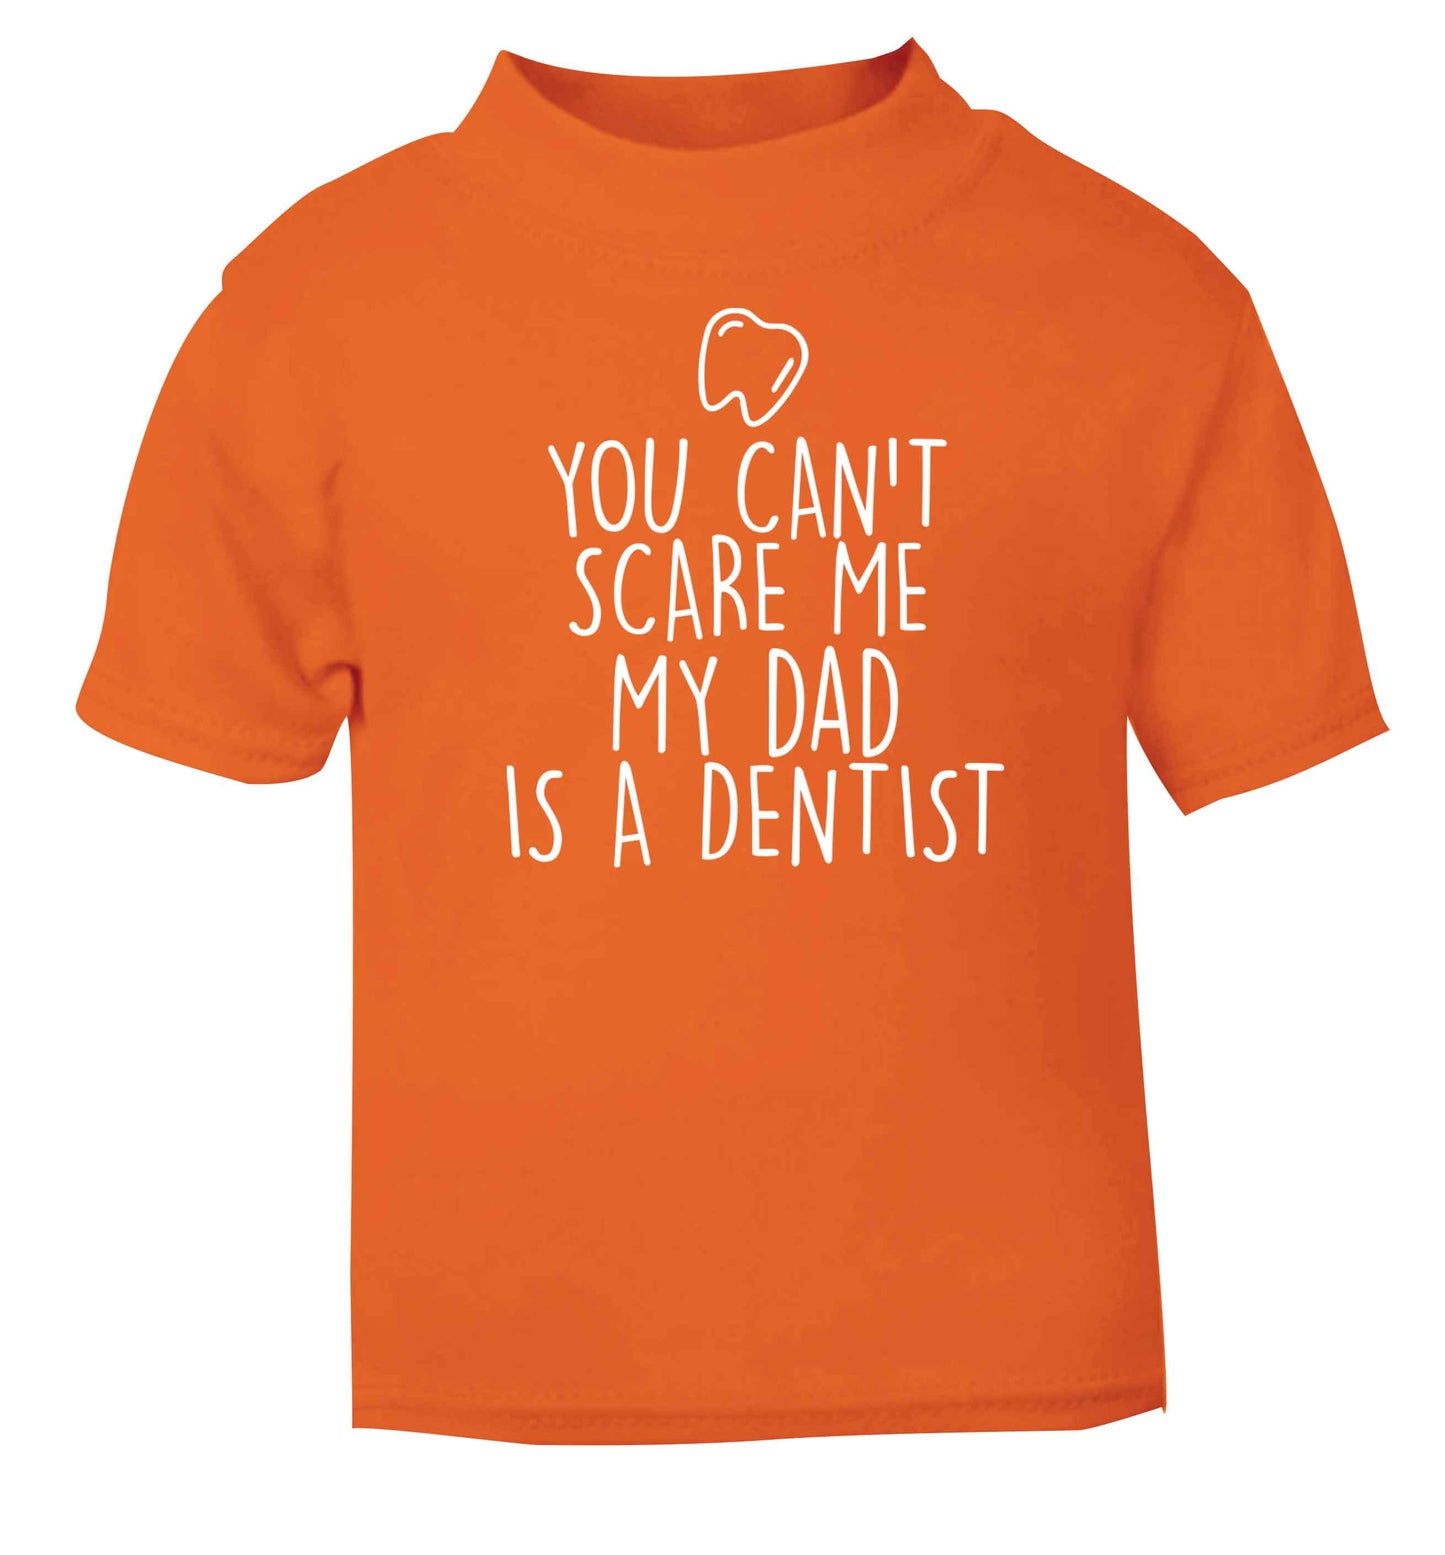 You can't scare me my dad is a dentist orange baby toddler Tshirt 2 Years